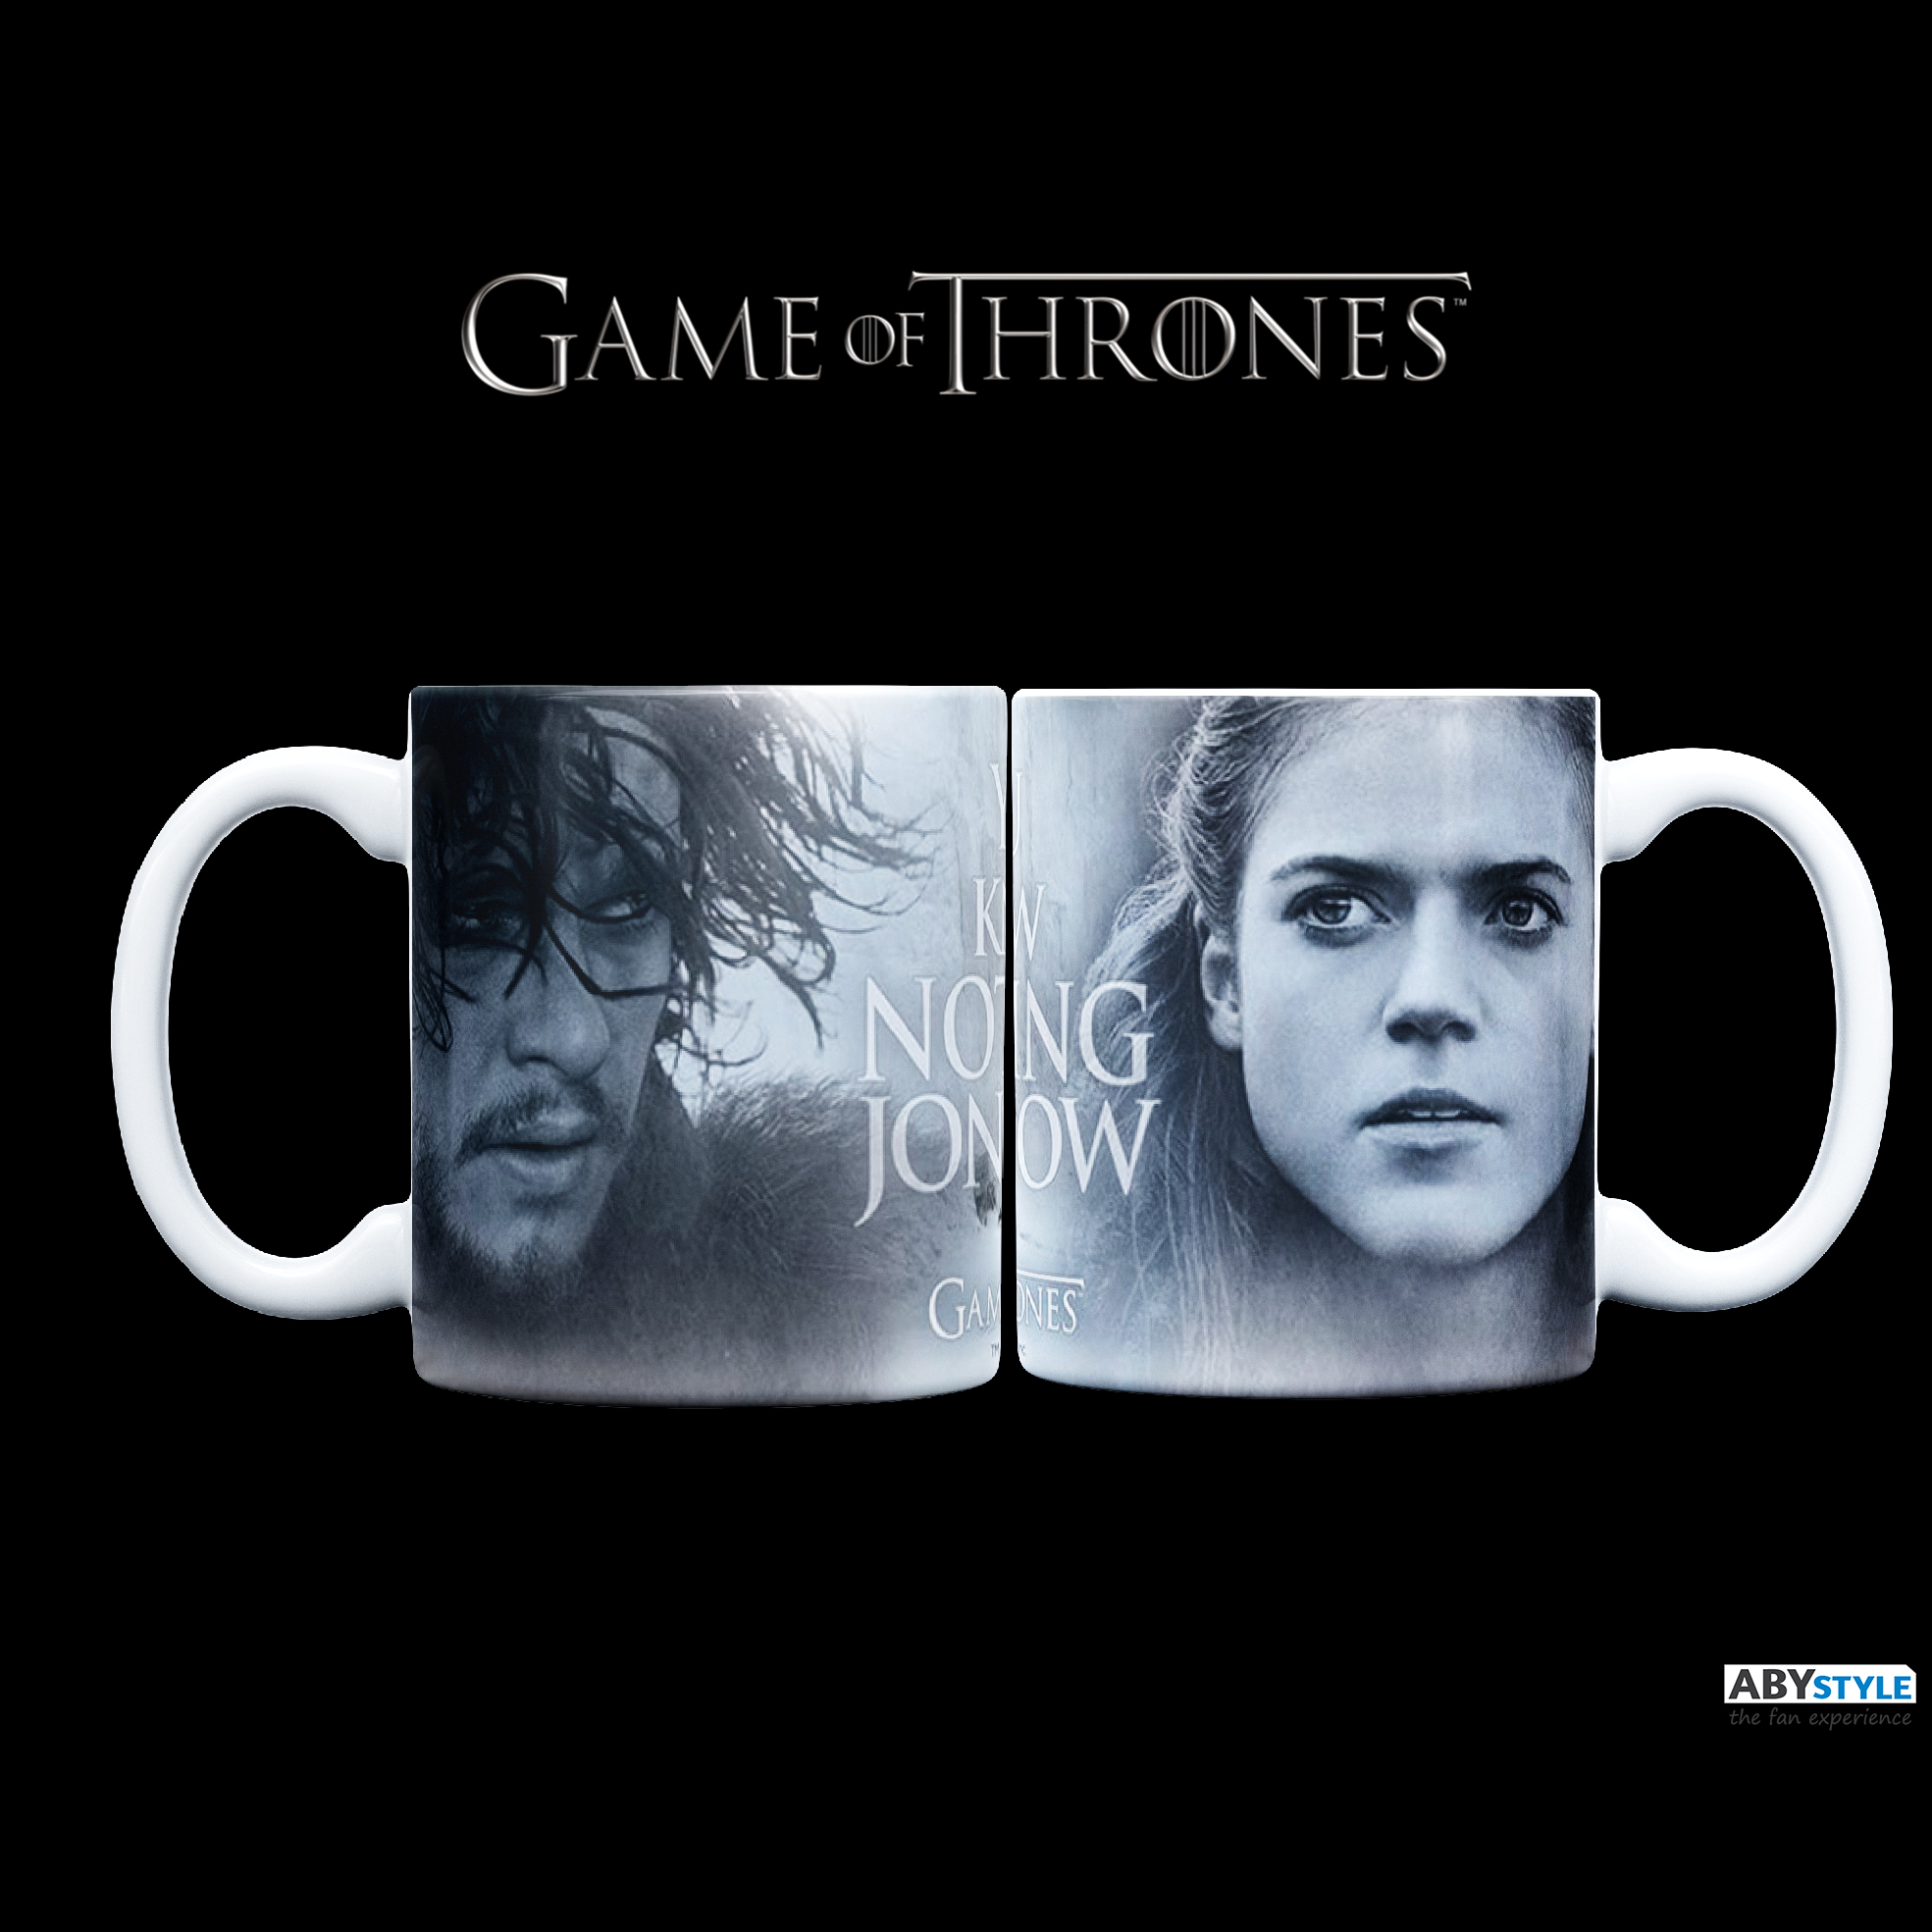 GAME OF THRONES Mug You Know Nothing King size